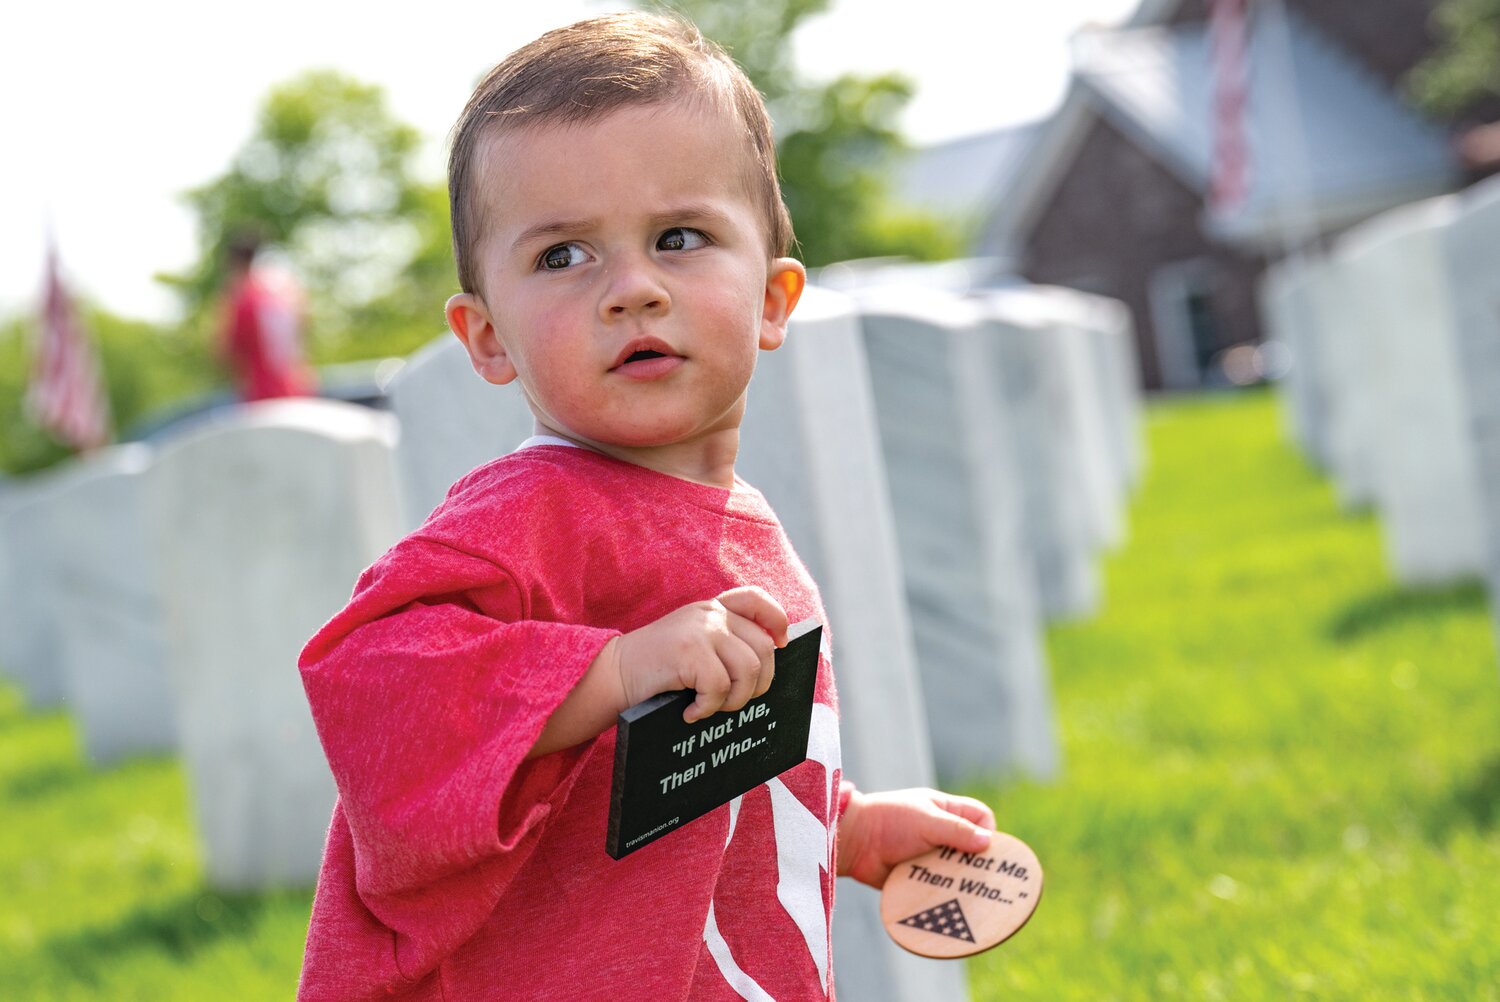 Leonardo Pellicore, 14 months, holds tokens that were placed on the graves of service members at Washington Crossing National Cemetery.